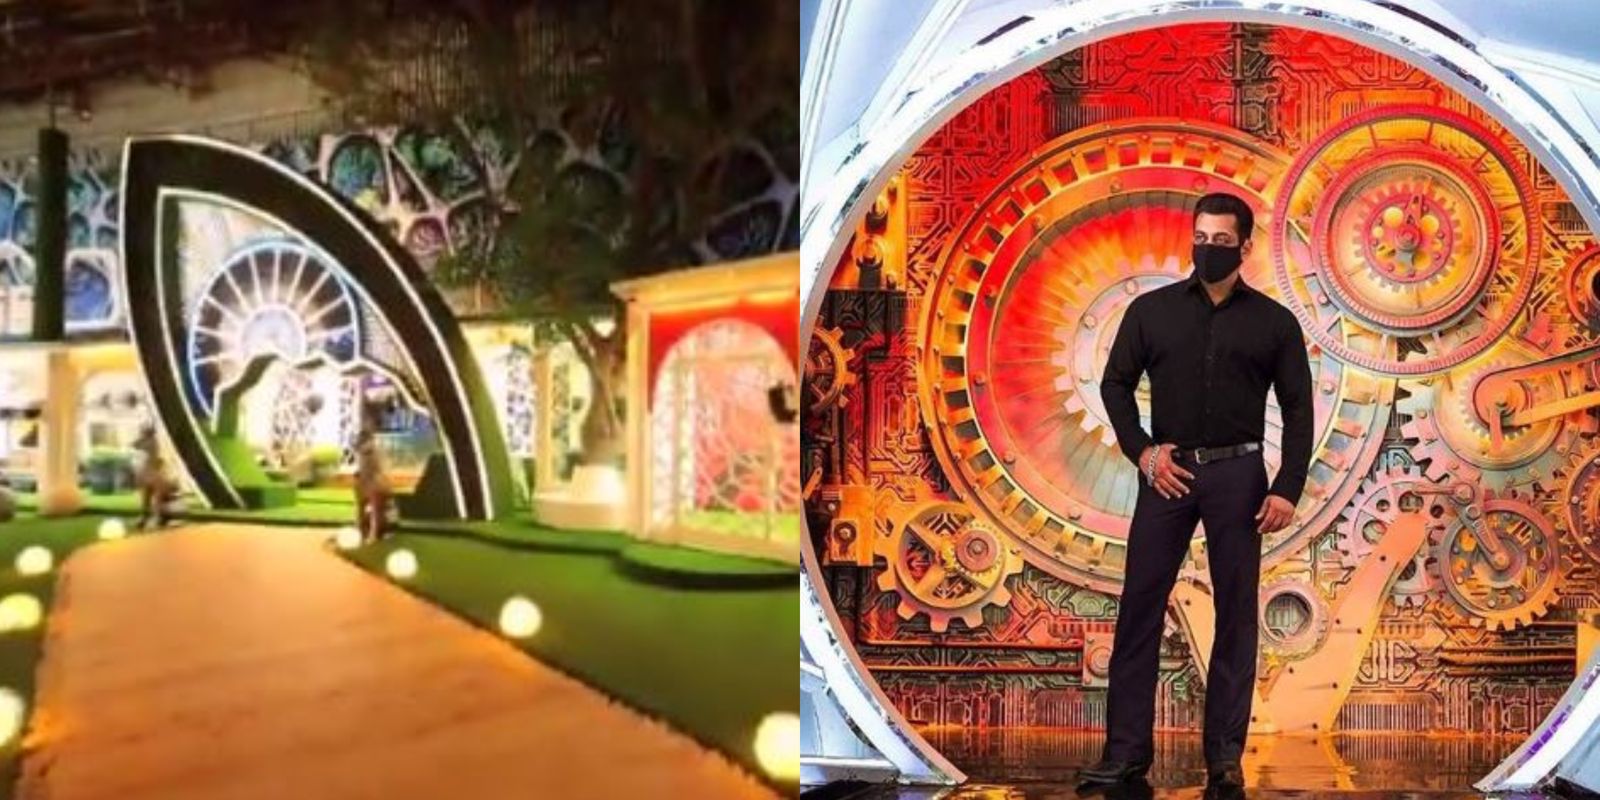 Bigg Boss 14 Mansion Is Straight Out Of Our Quarantine Dreams, The House Gets Bigger With Perks We Missed During Lockdown